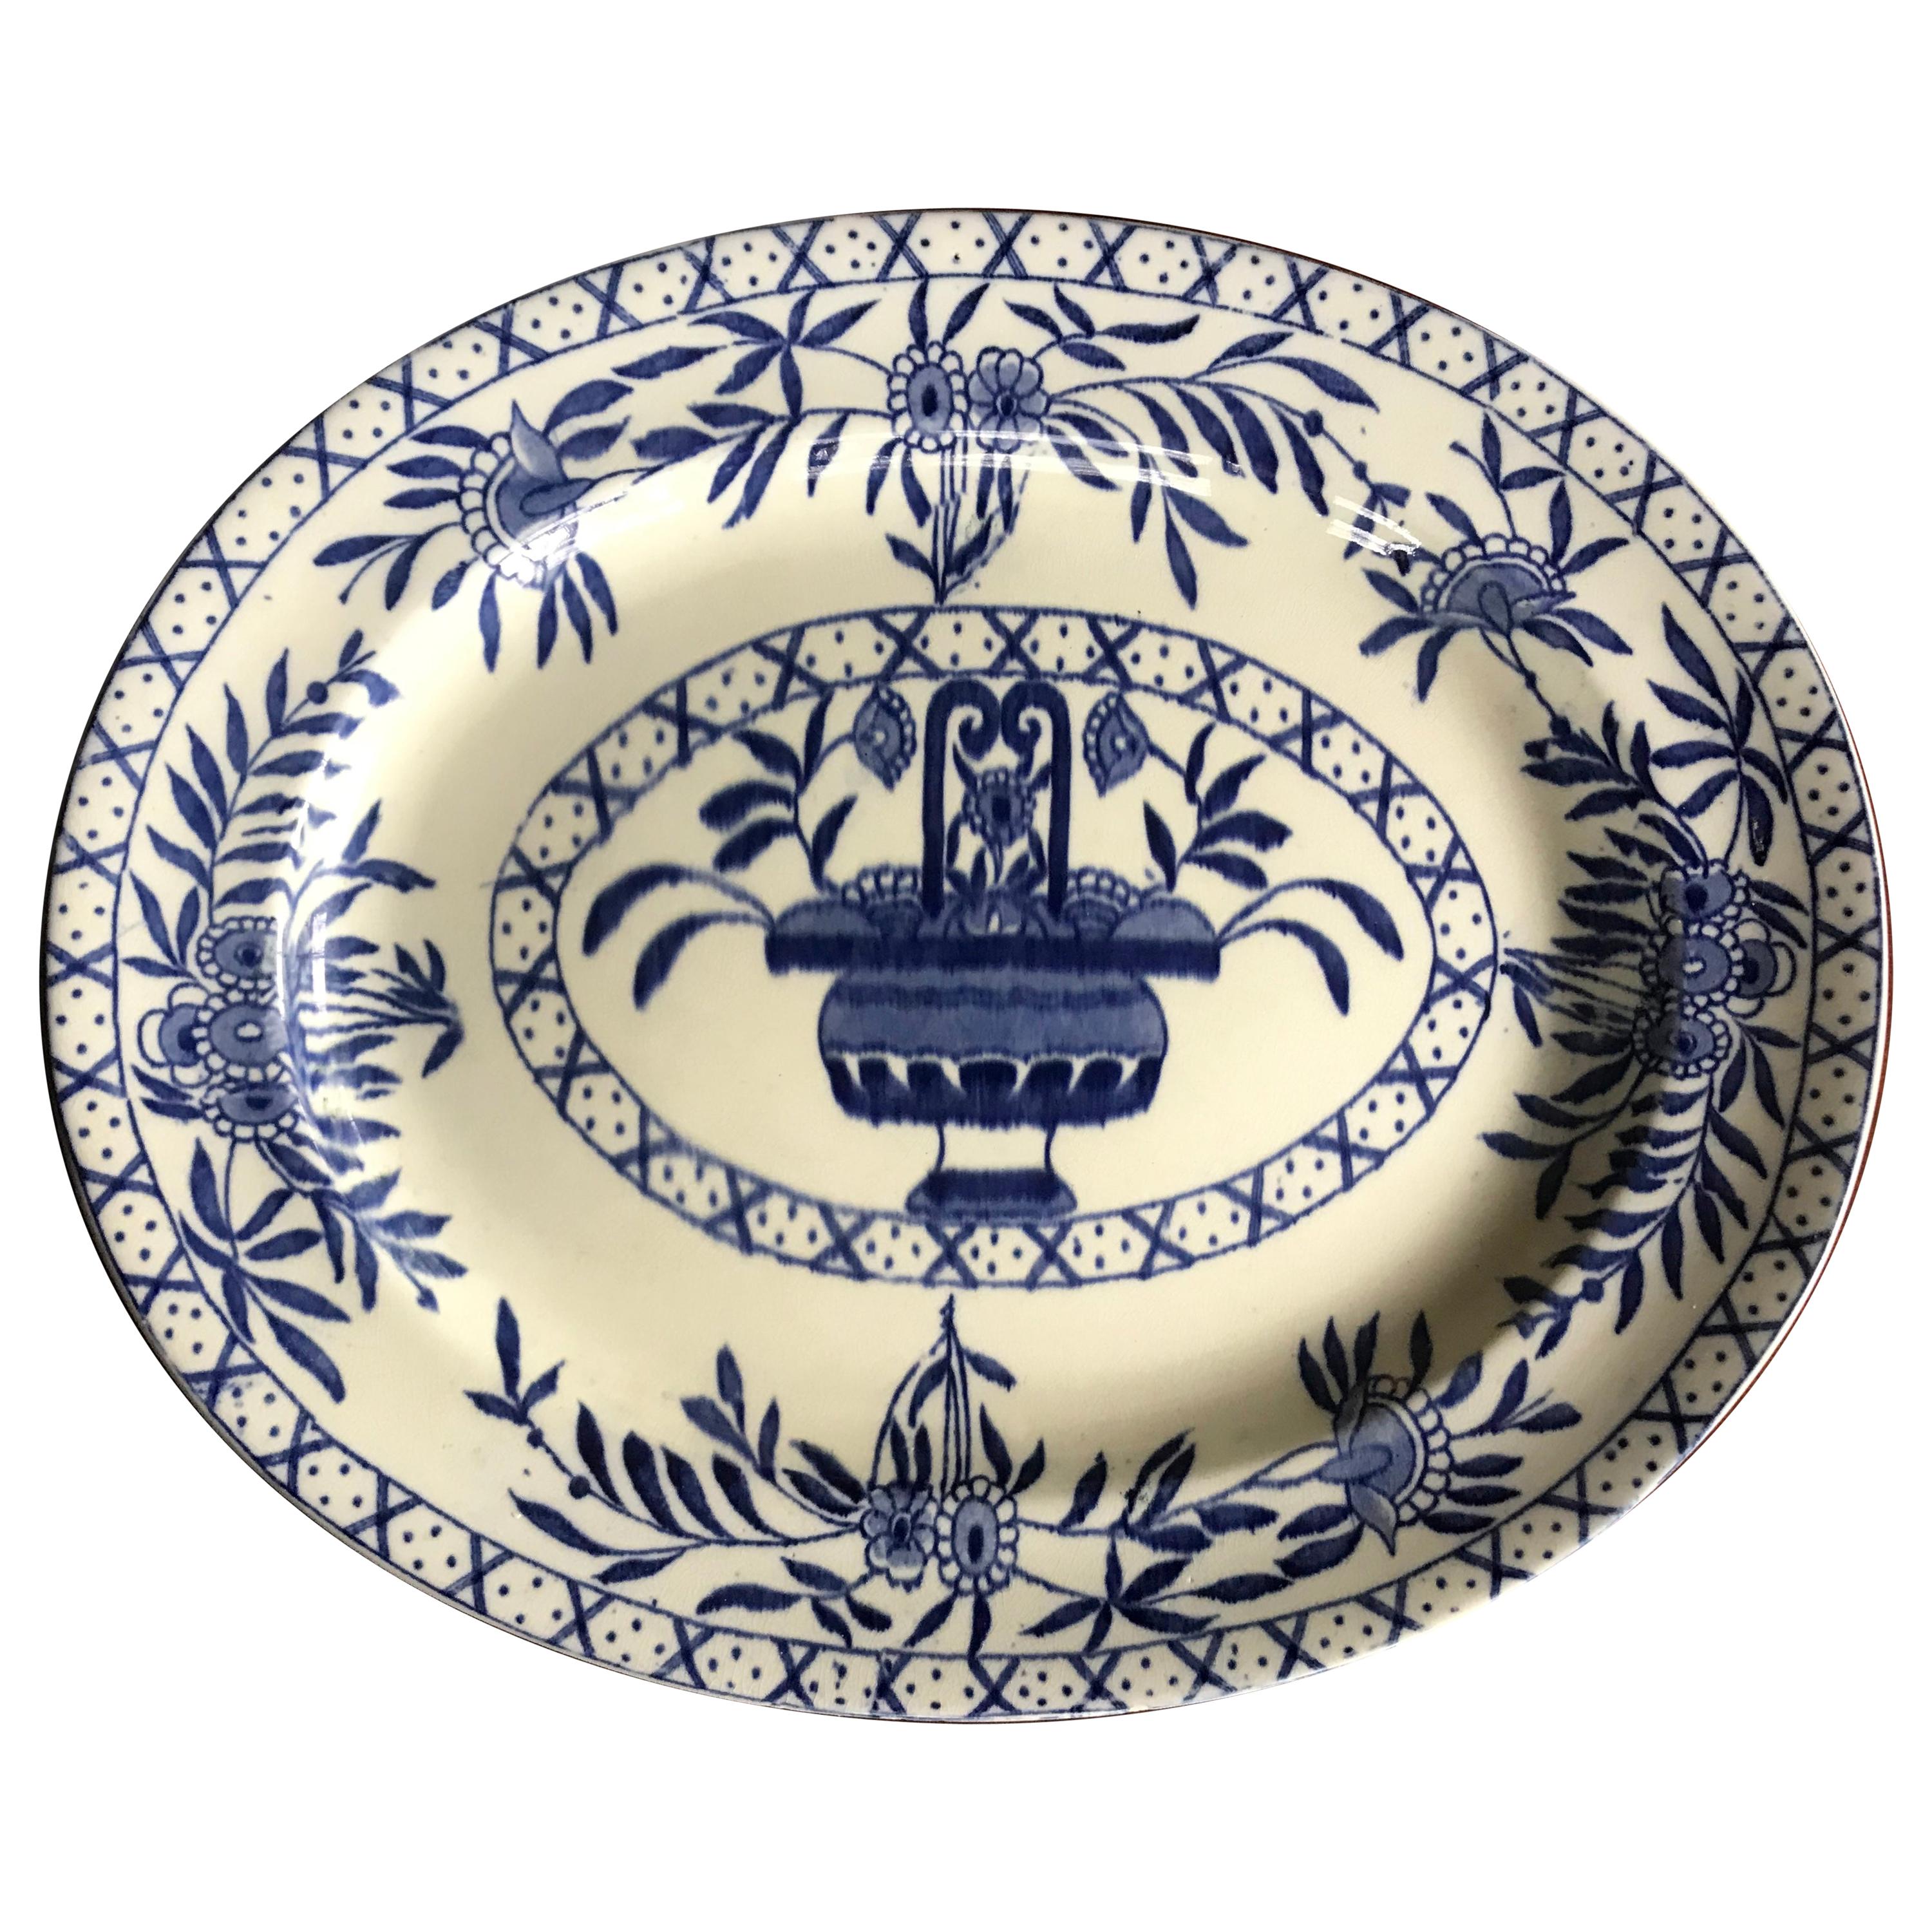 Large Blue and White Oval Platter